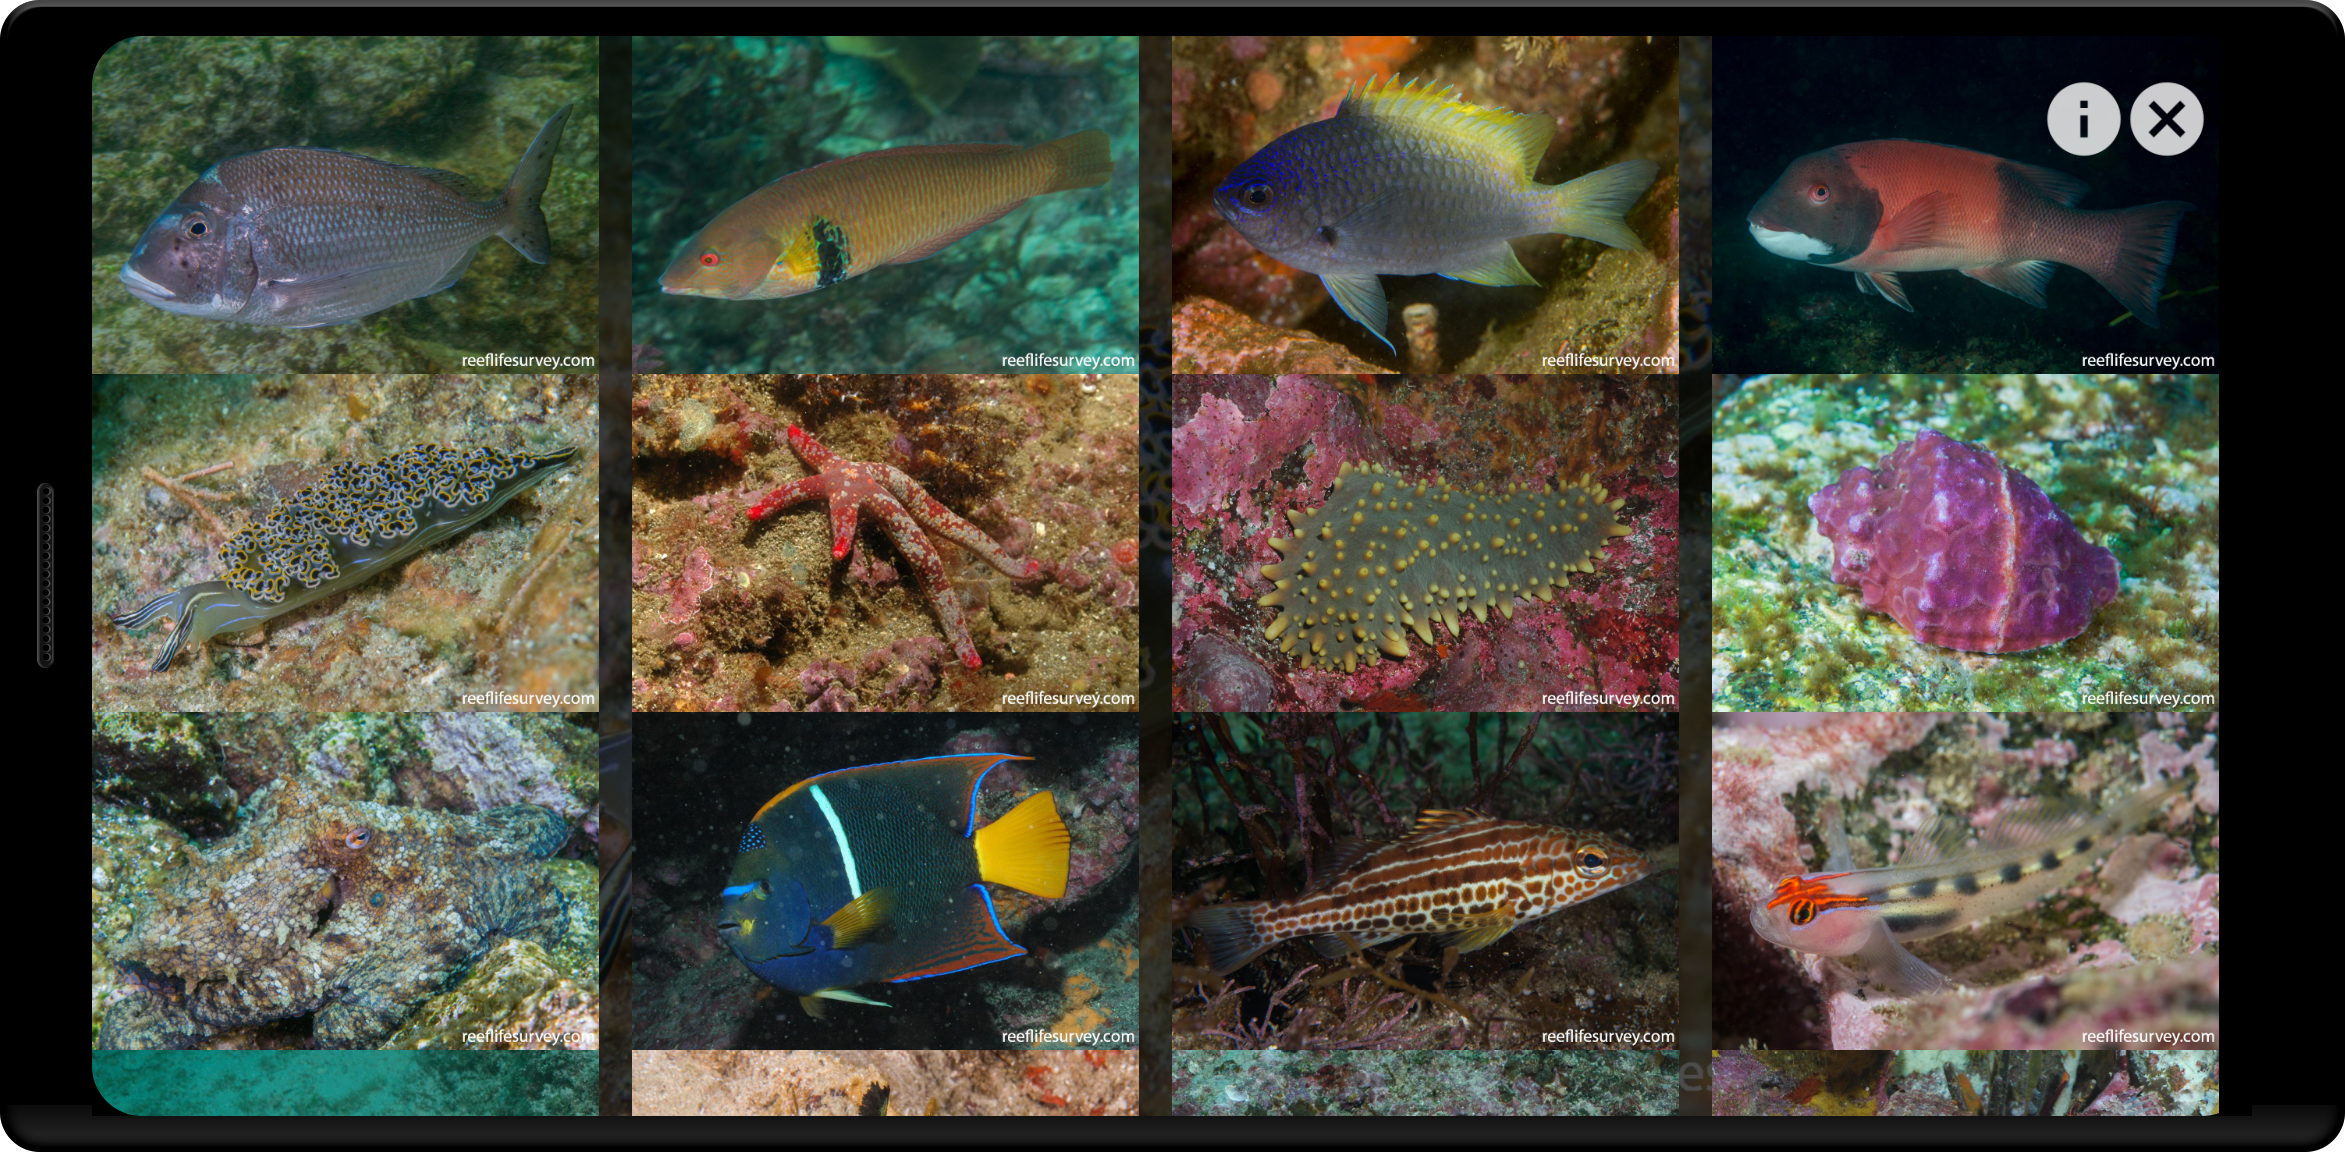 ReefLifeSurvey - mobile app to view high quality images of aquatic species